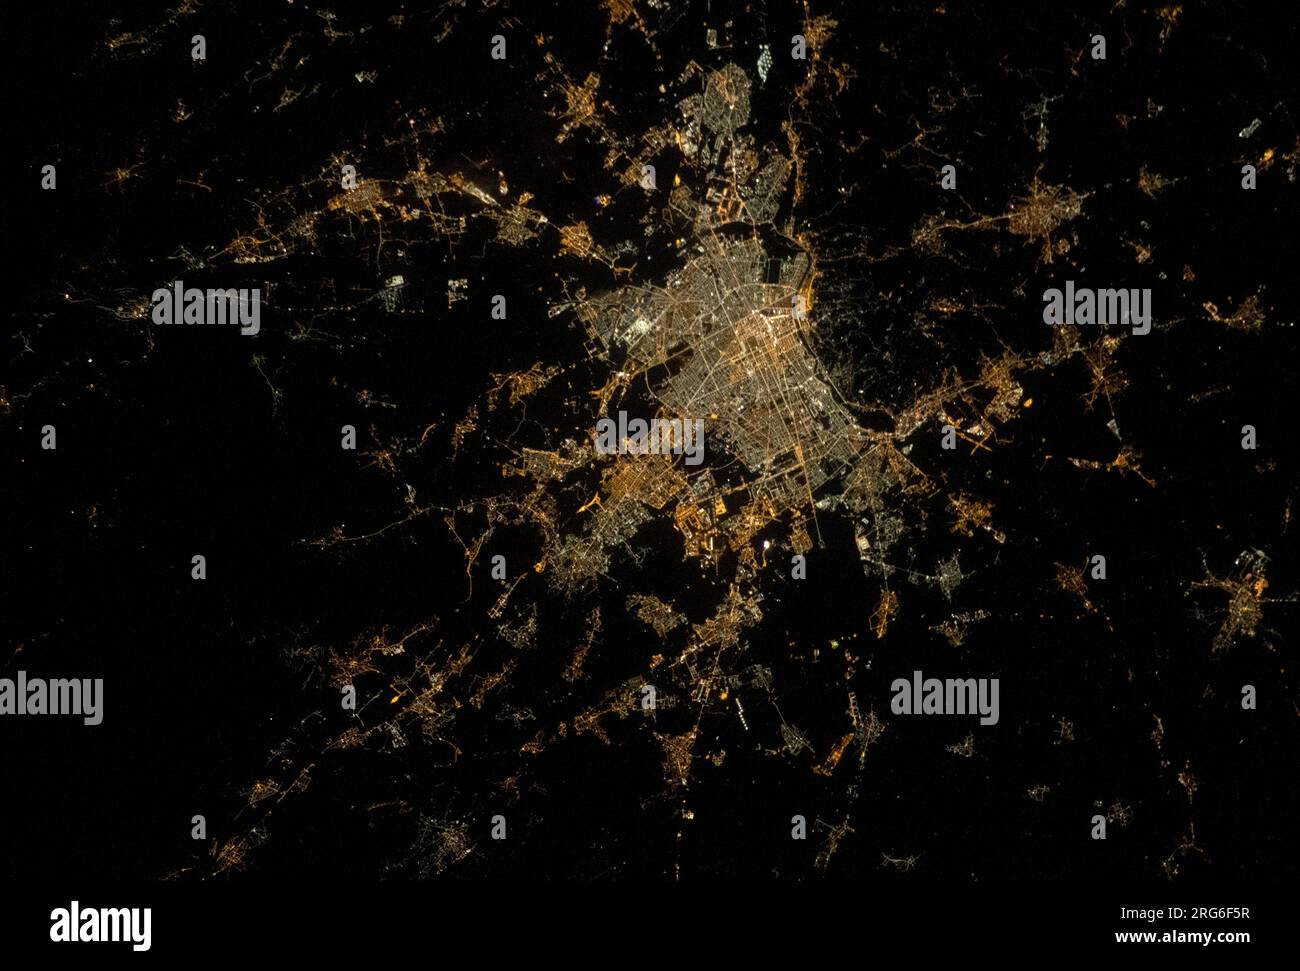 The city of Turin in northwestern Italy at night, taken from the International Space Station. Stock Photo